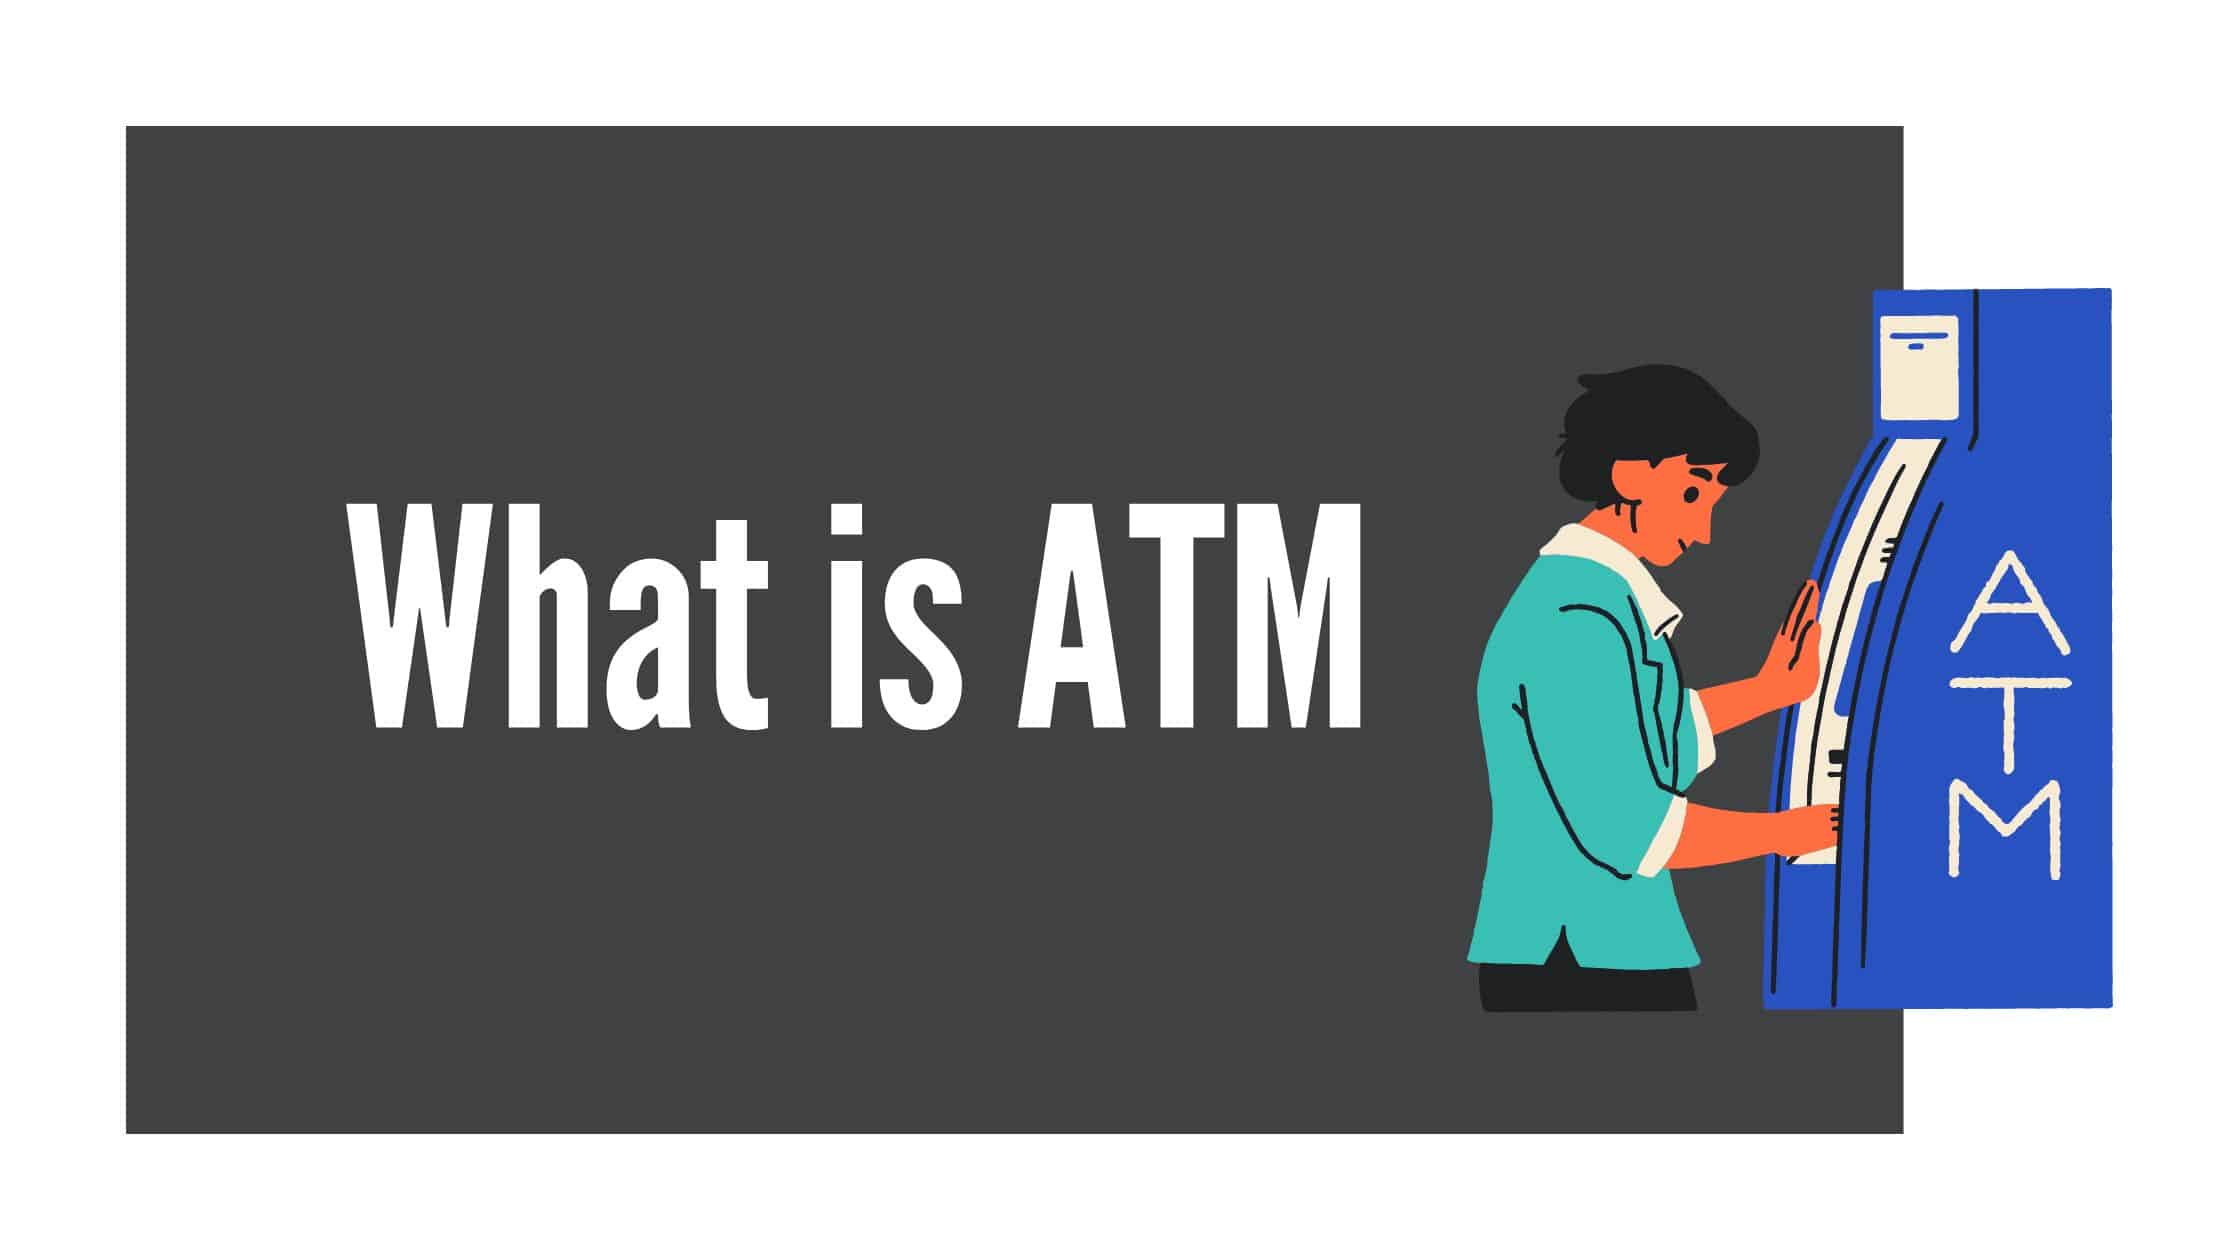 What is an ATM?